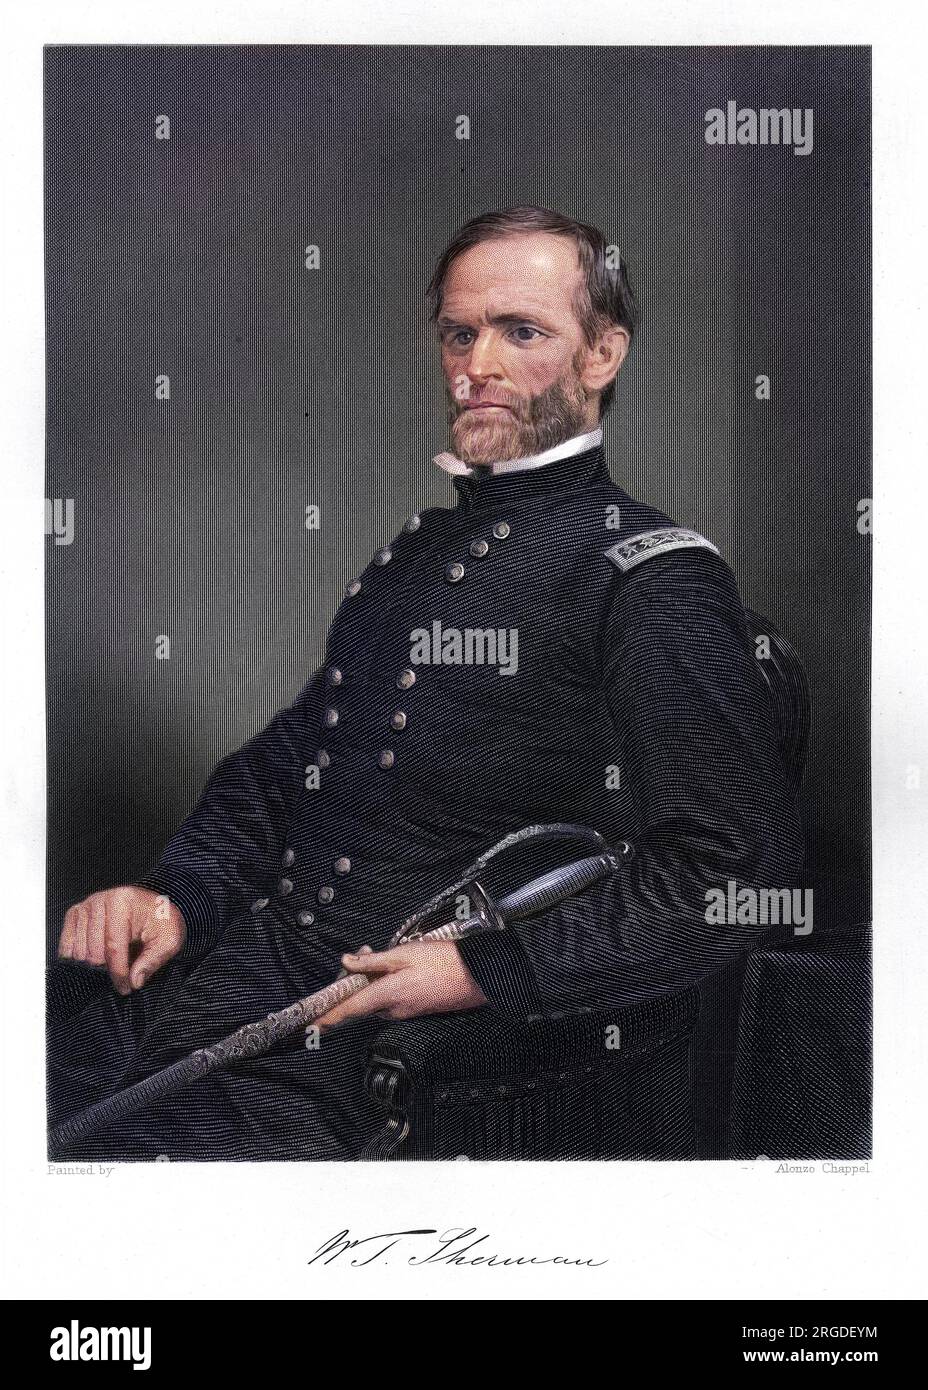 WILLIAM TECUMSEH SHERMAN (1820 - 1891), American military commander in the Federal army during the Civil War, with his autograph. Stock Photo